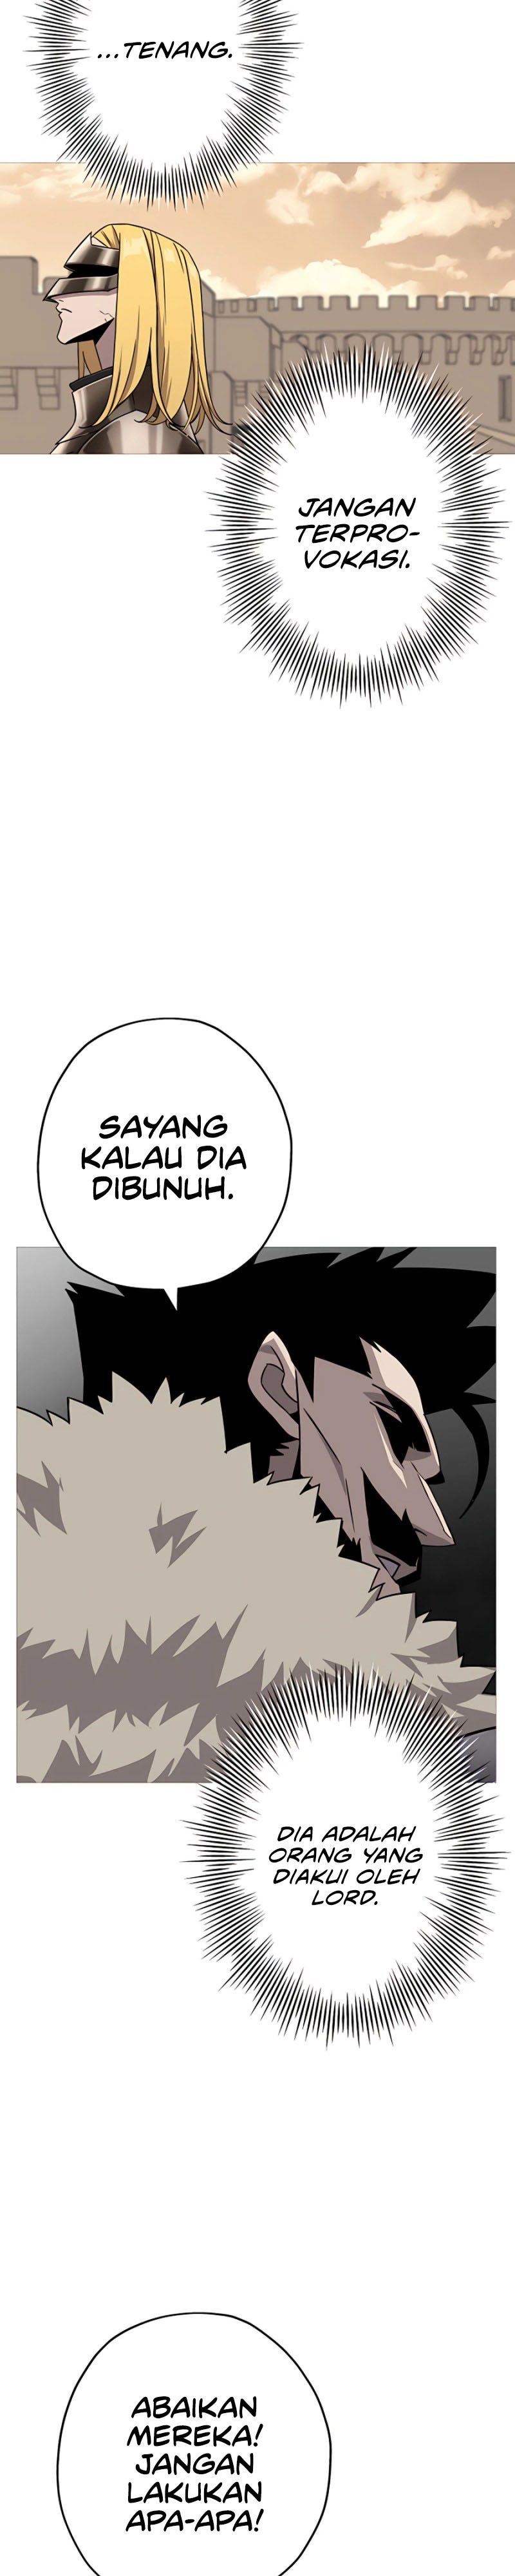 Dilarang COPAS - situs resmi www.mangacanblog.com - Komik the story of a low rank soldier becoming a monarch 088 - chapter 88 89 Indonesia the story of a low rank soldier becoming a monarch 088 - chapter 88 Terbaru 26|Baca Manga Komik Indonesia|Mangacan